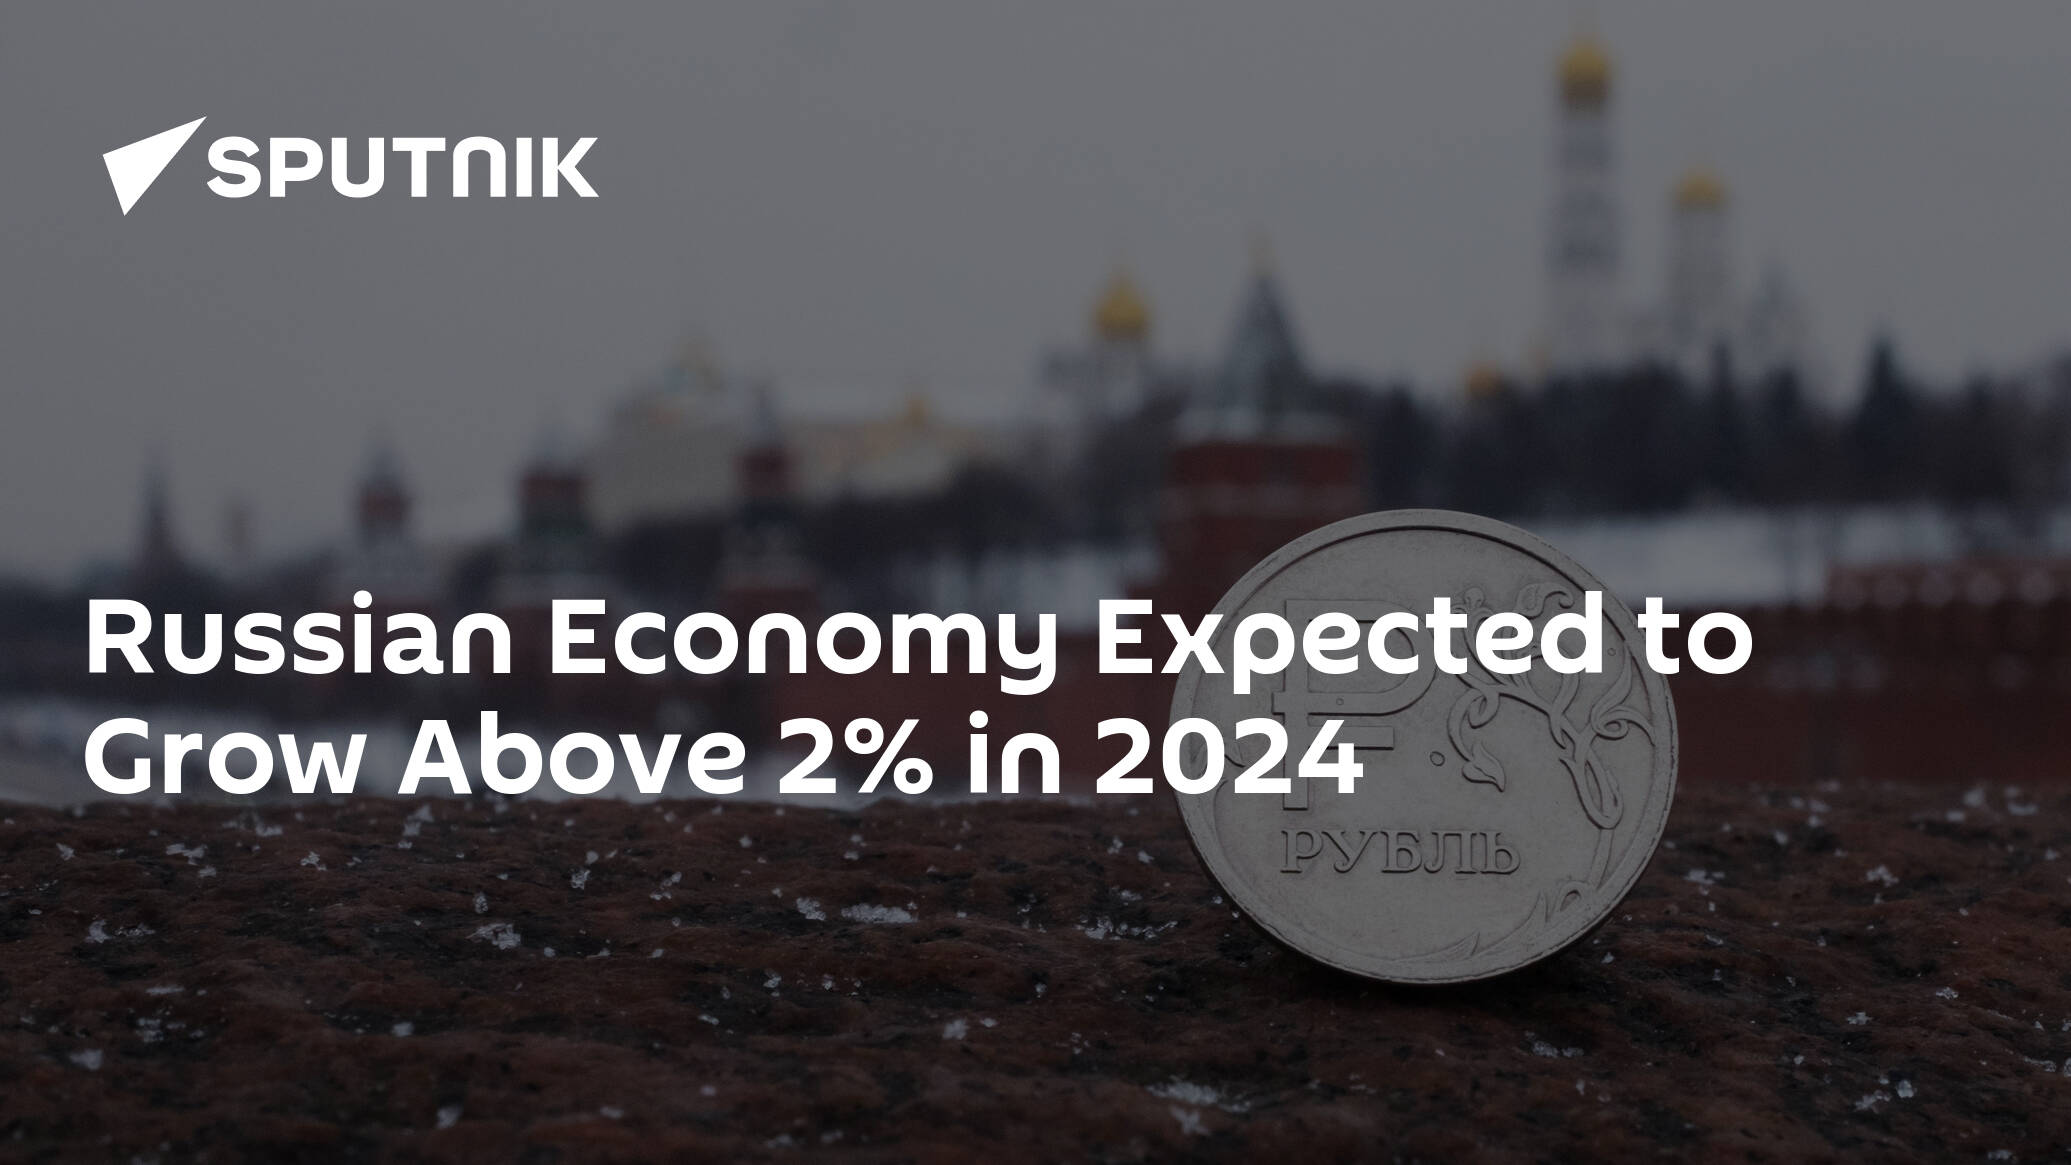 Russian Economy Expected to Grow Above 2% in 2024